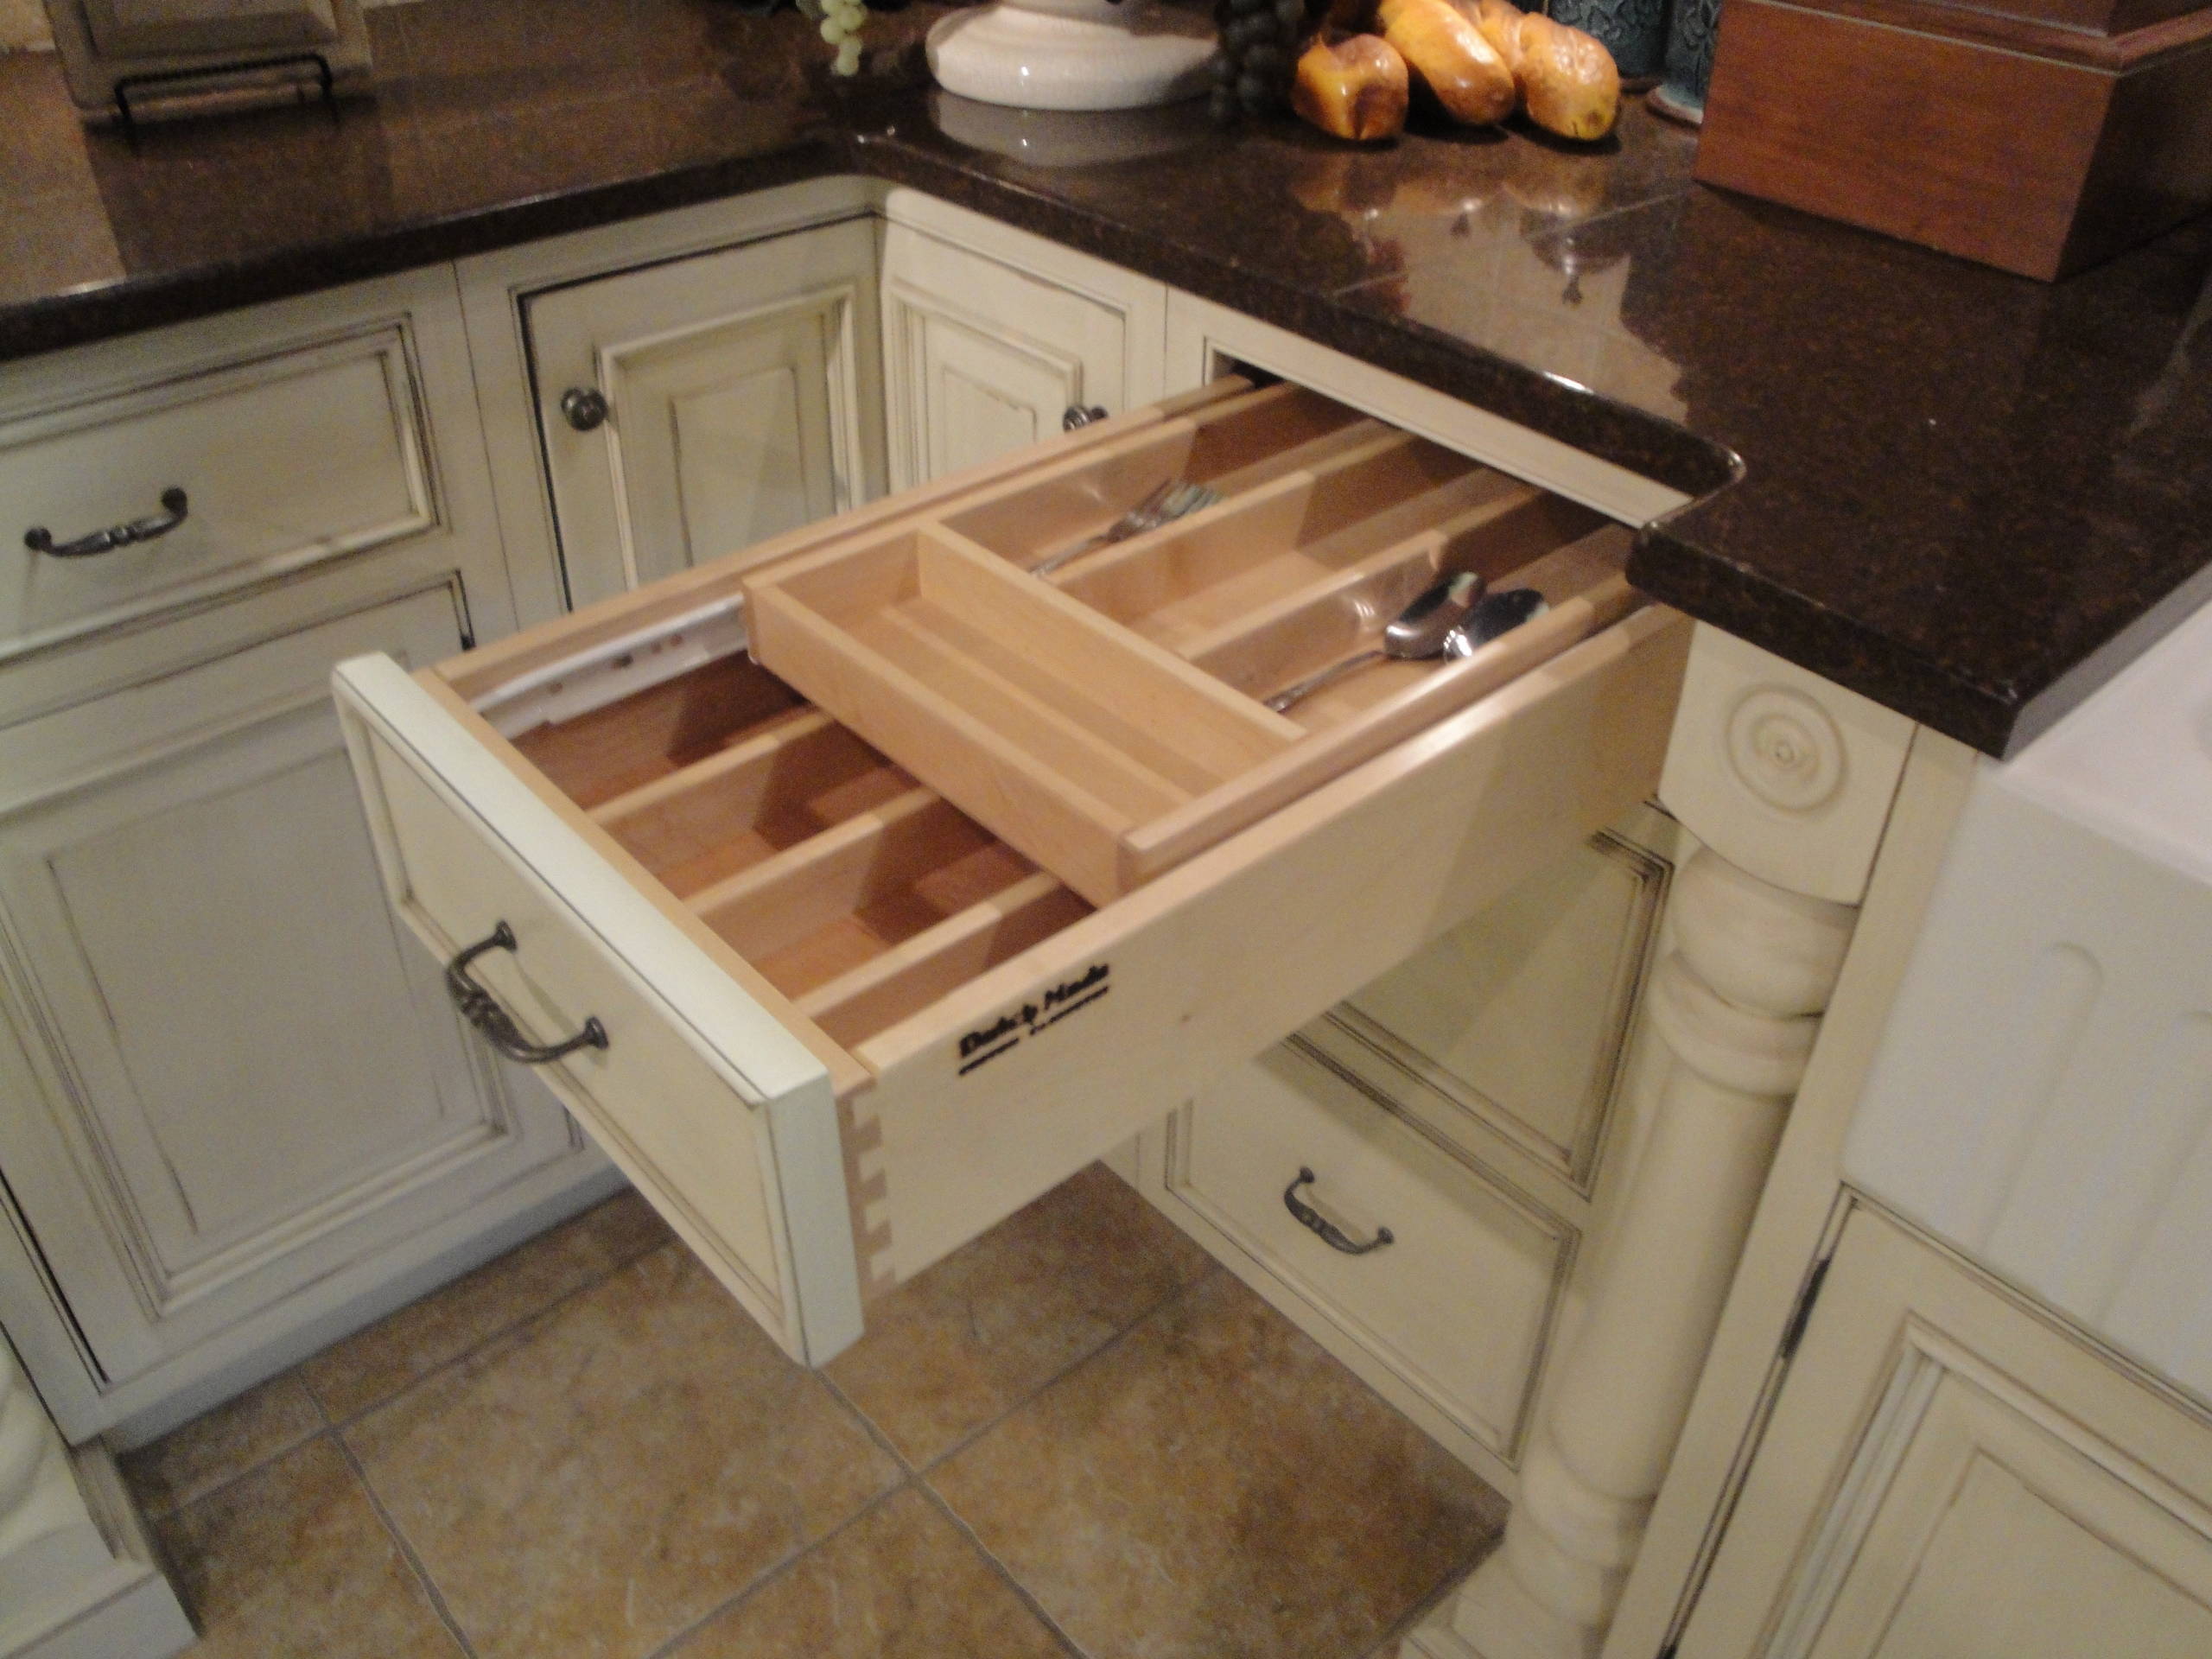 Drawer Organizer - Double Decker Cutlery Drawer Available in 20